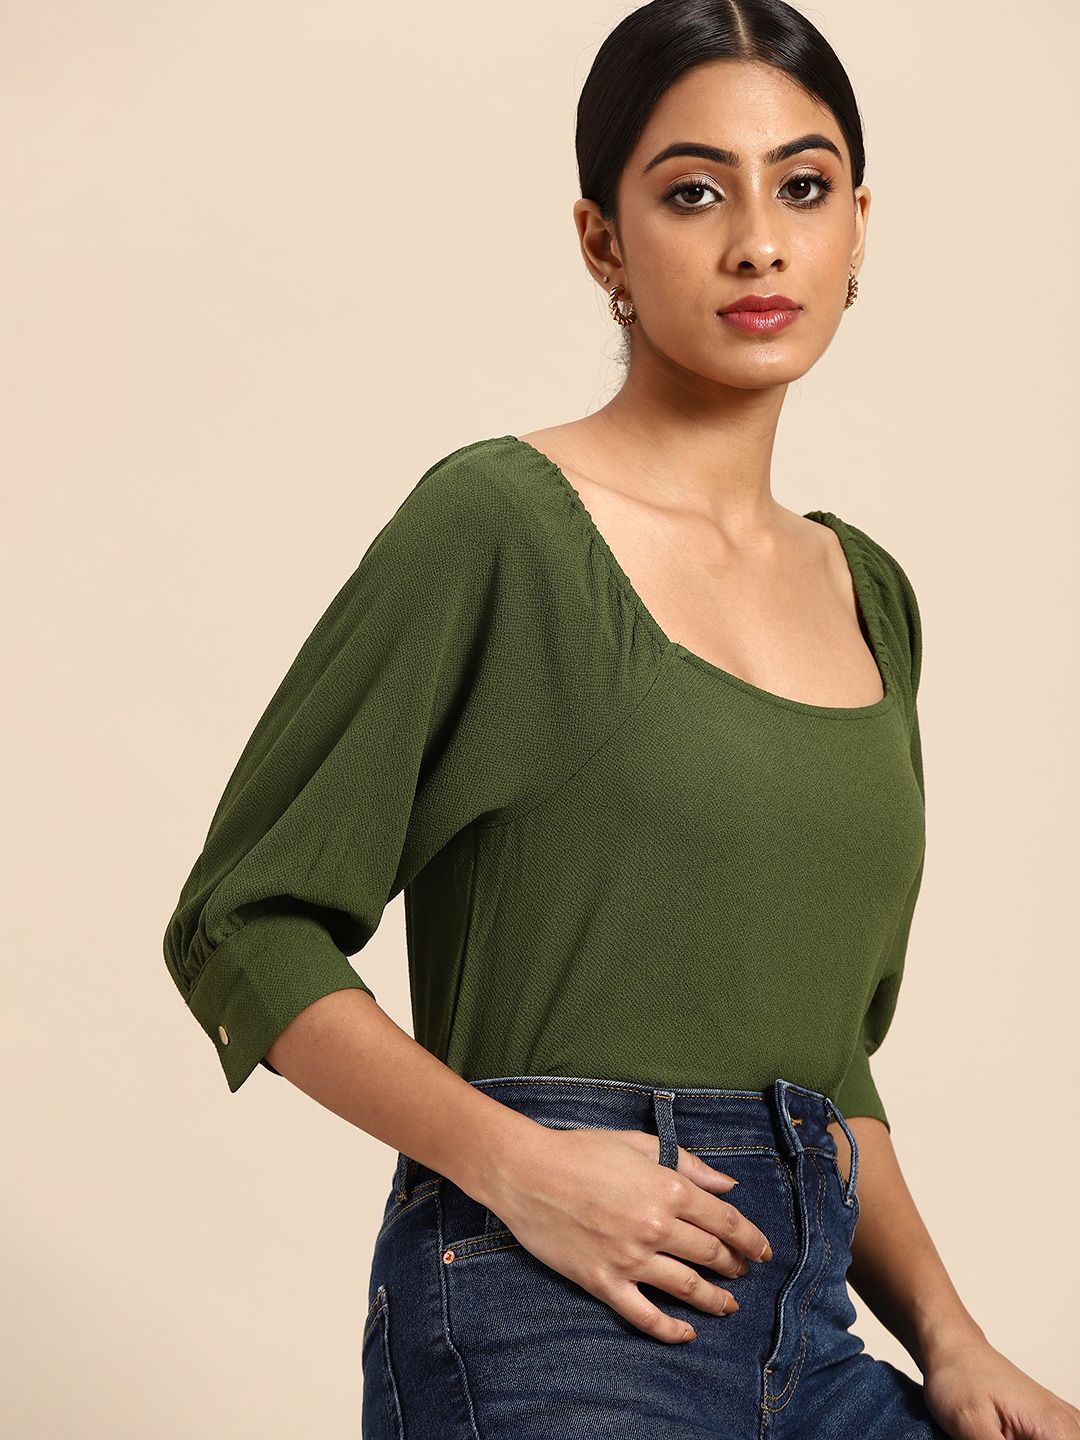 all about you Olive Green Square Neck Top Price in India